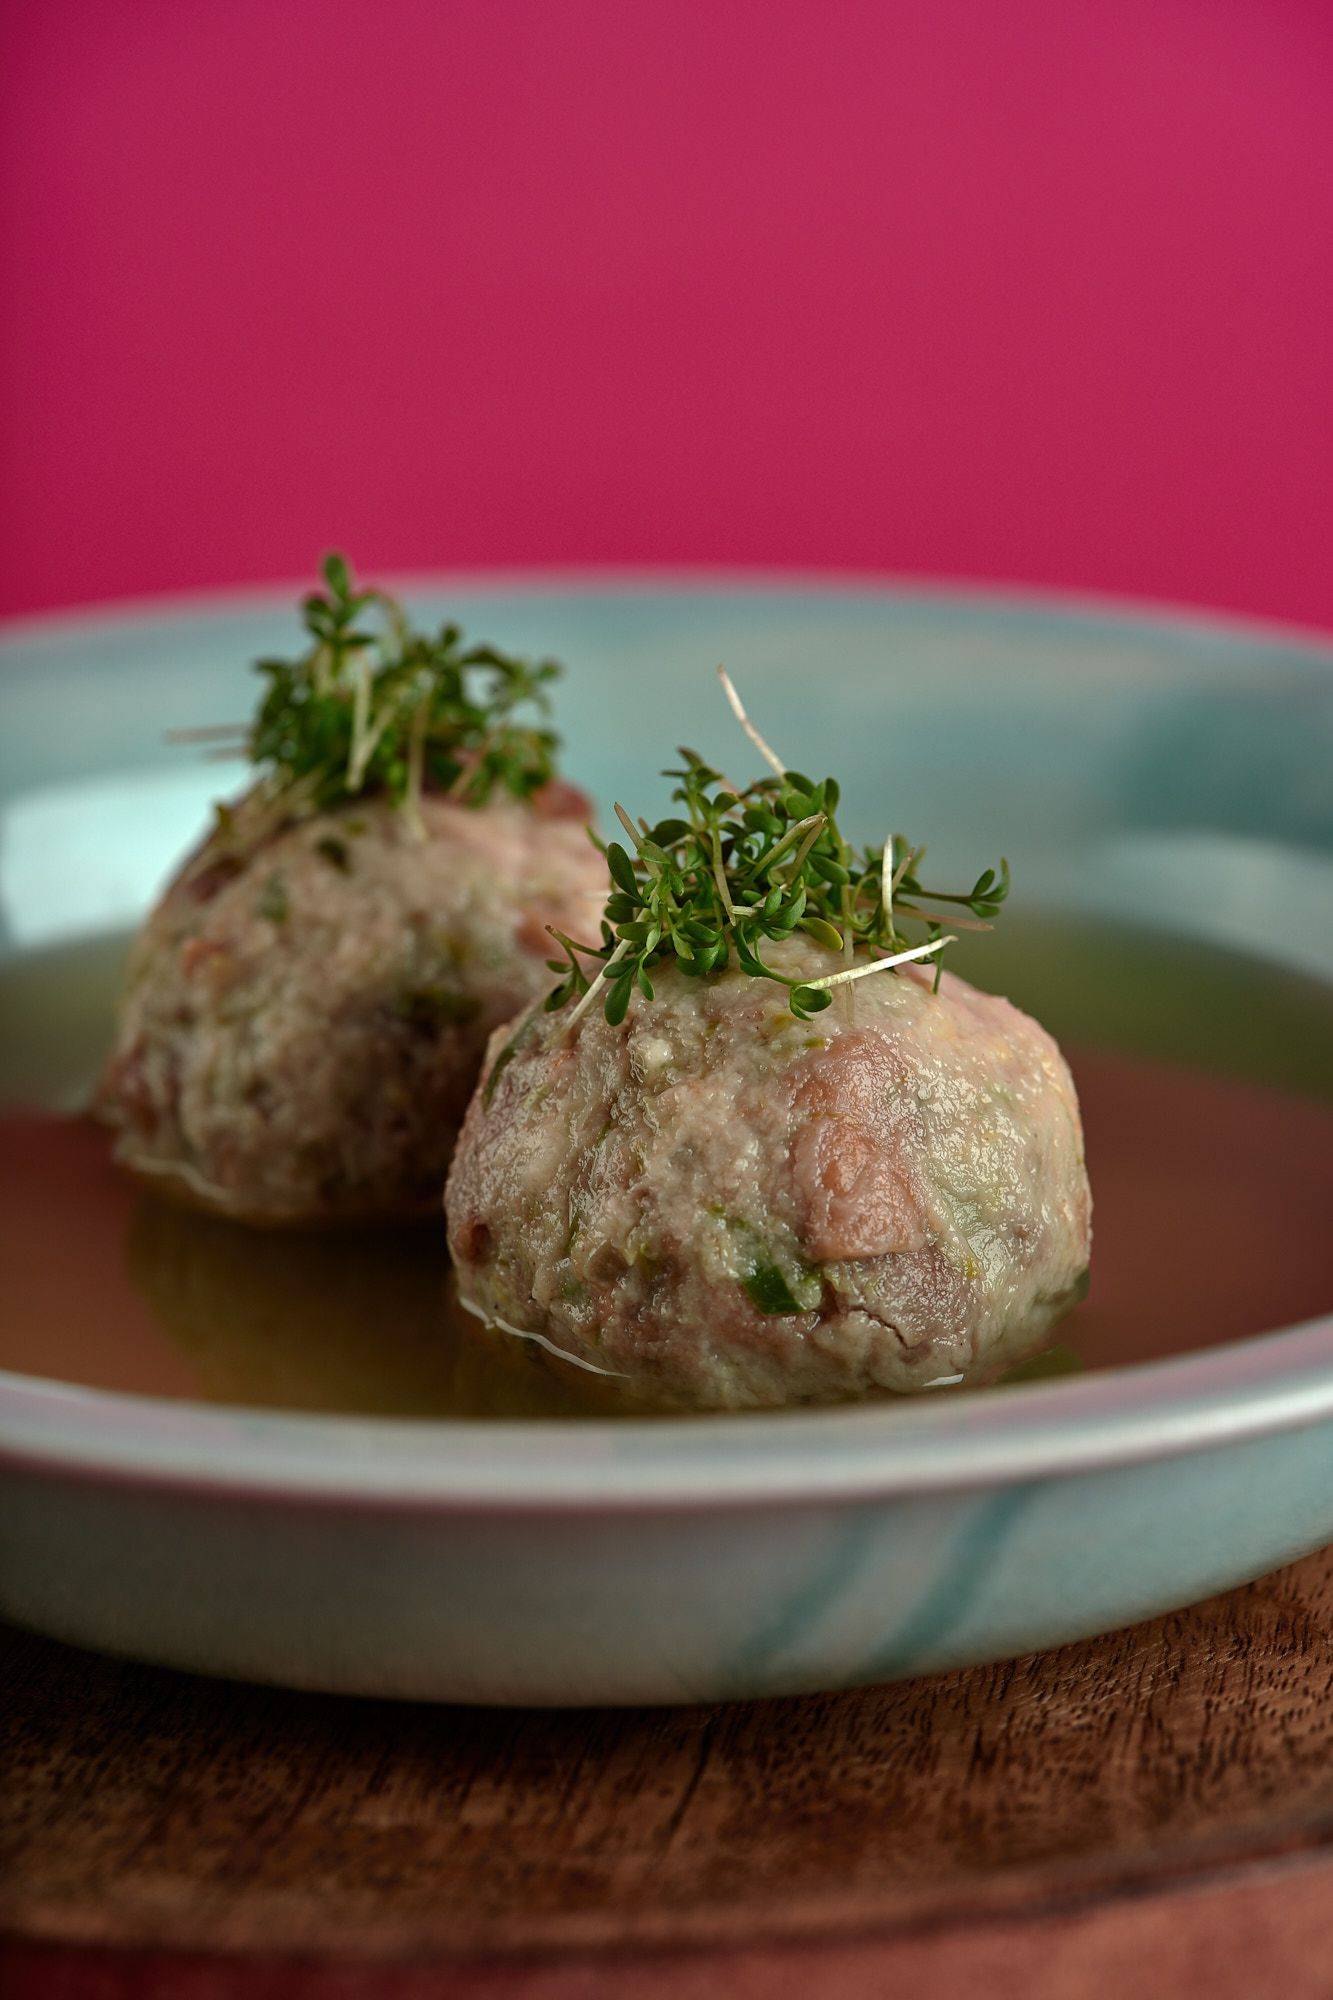 vegan bread dumplings with brussels sprouts and vegetable broth on a turquoise plate with pink background